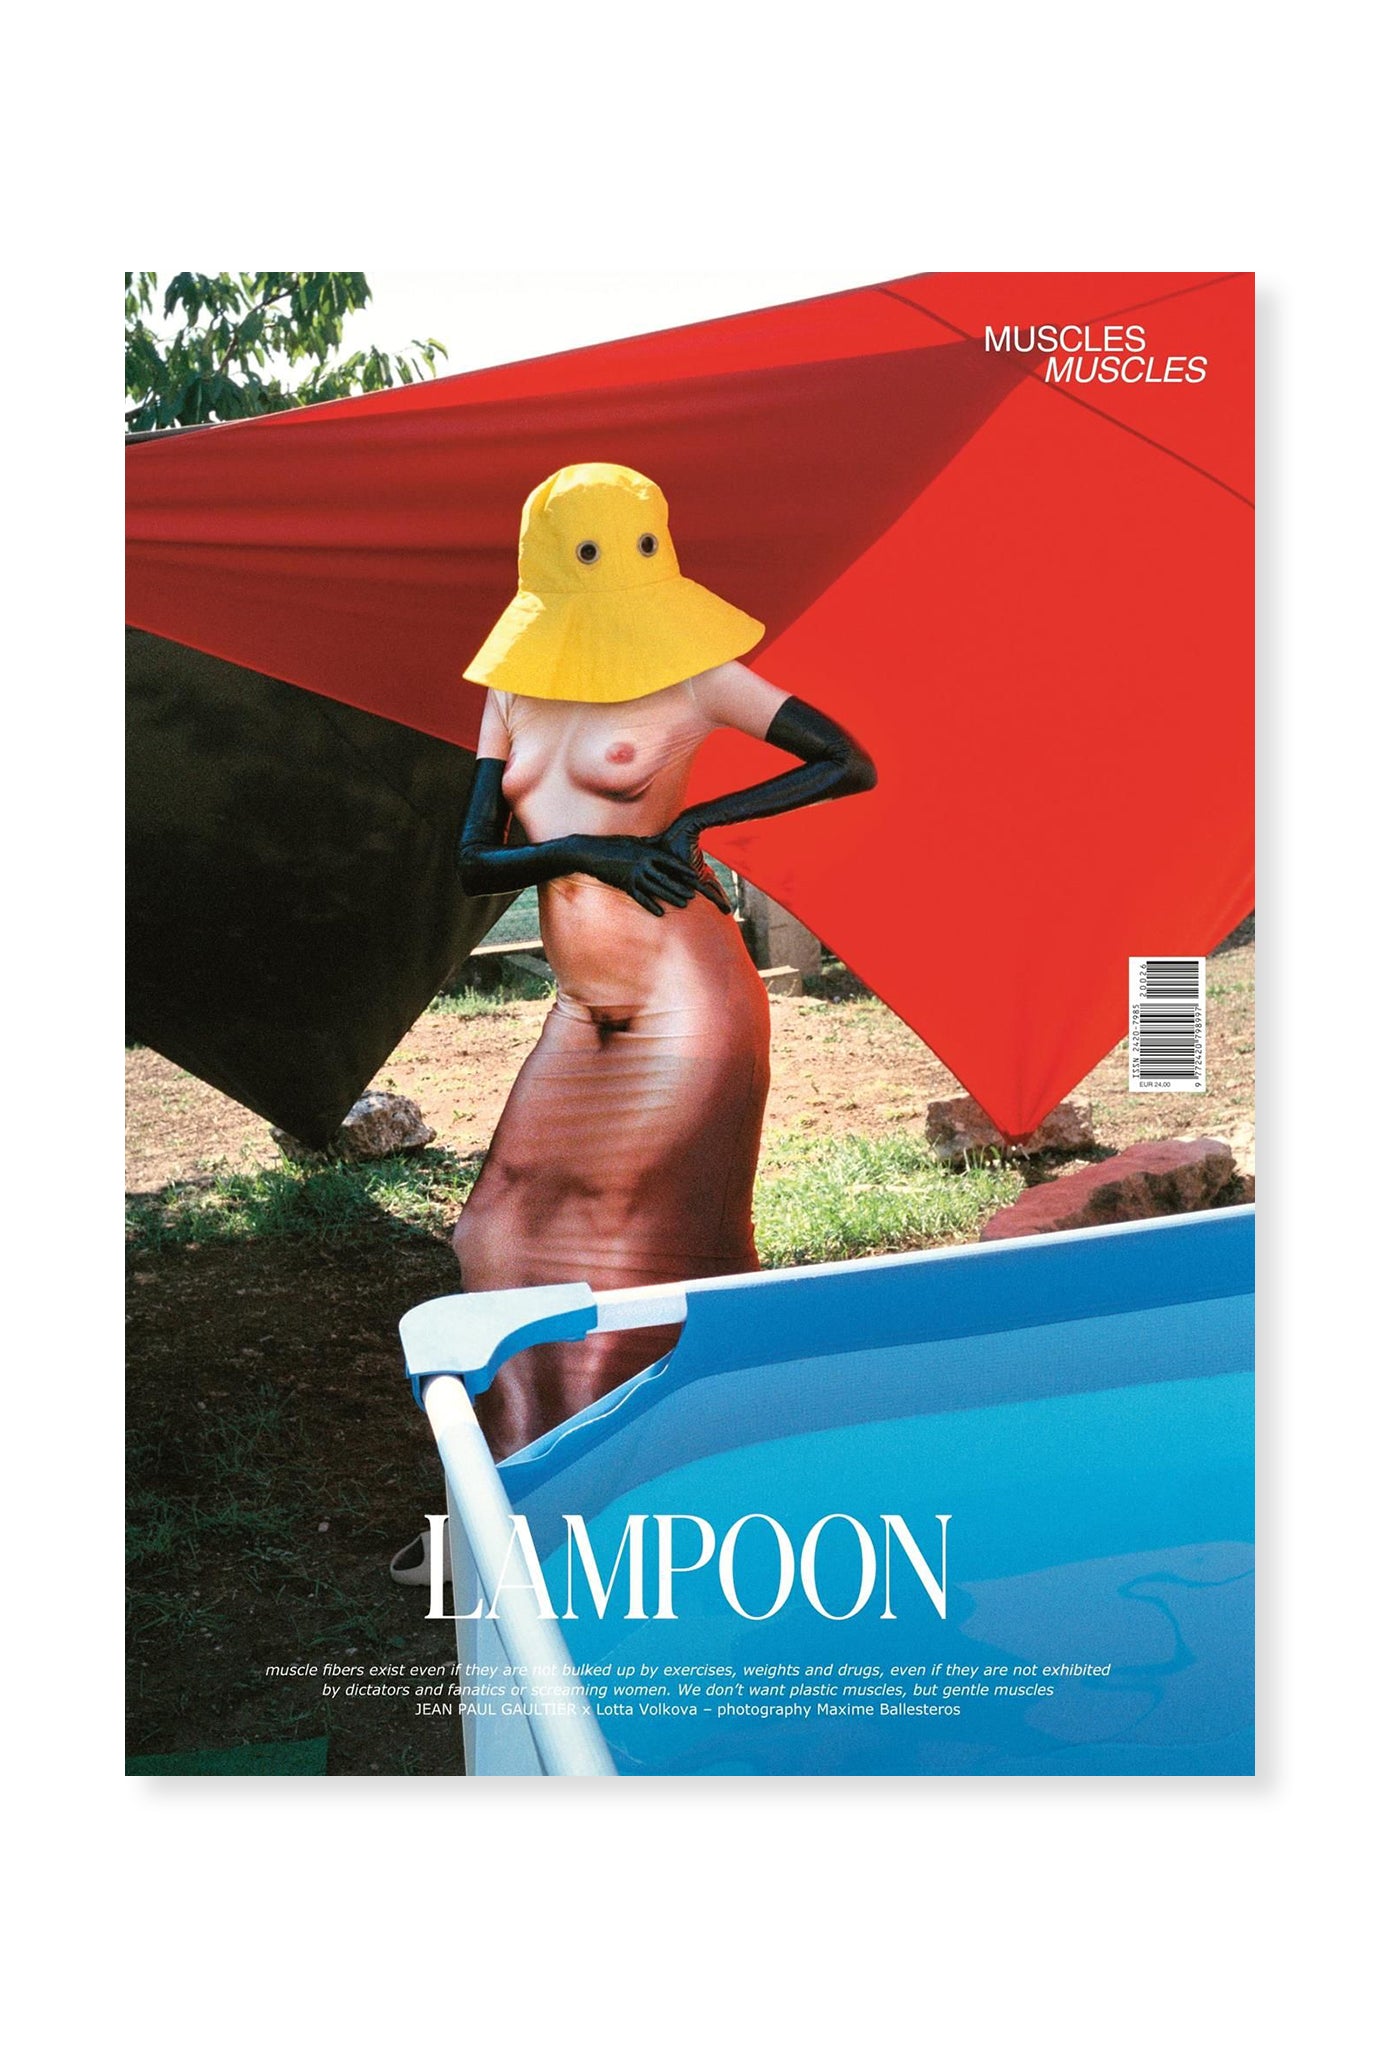 Lampoon, Issue 26